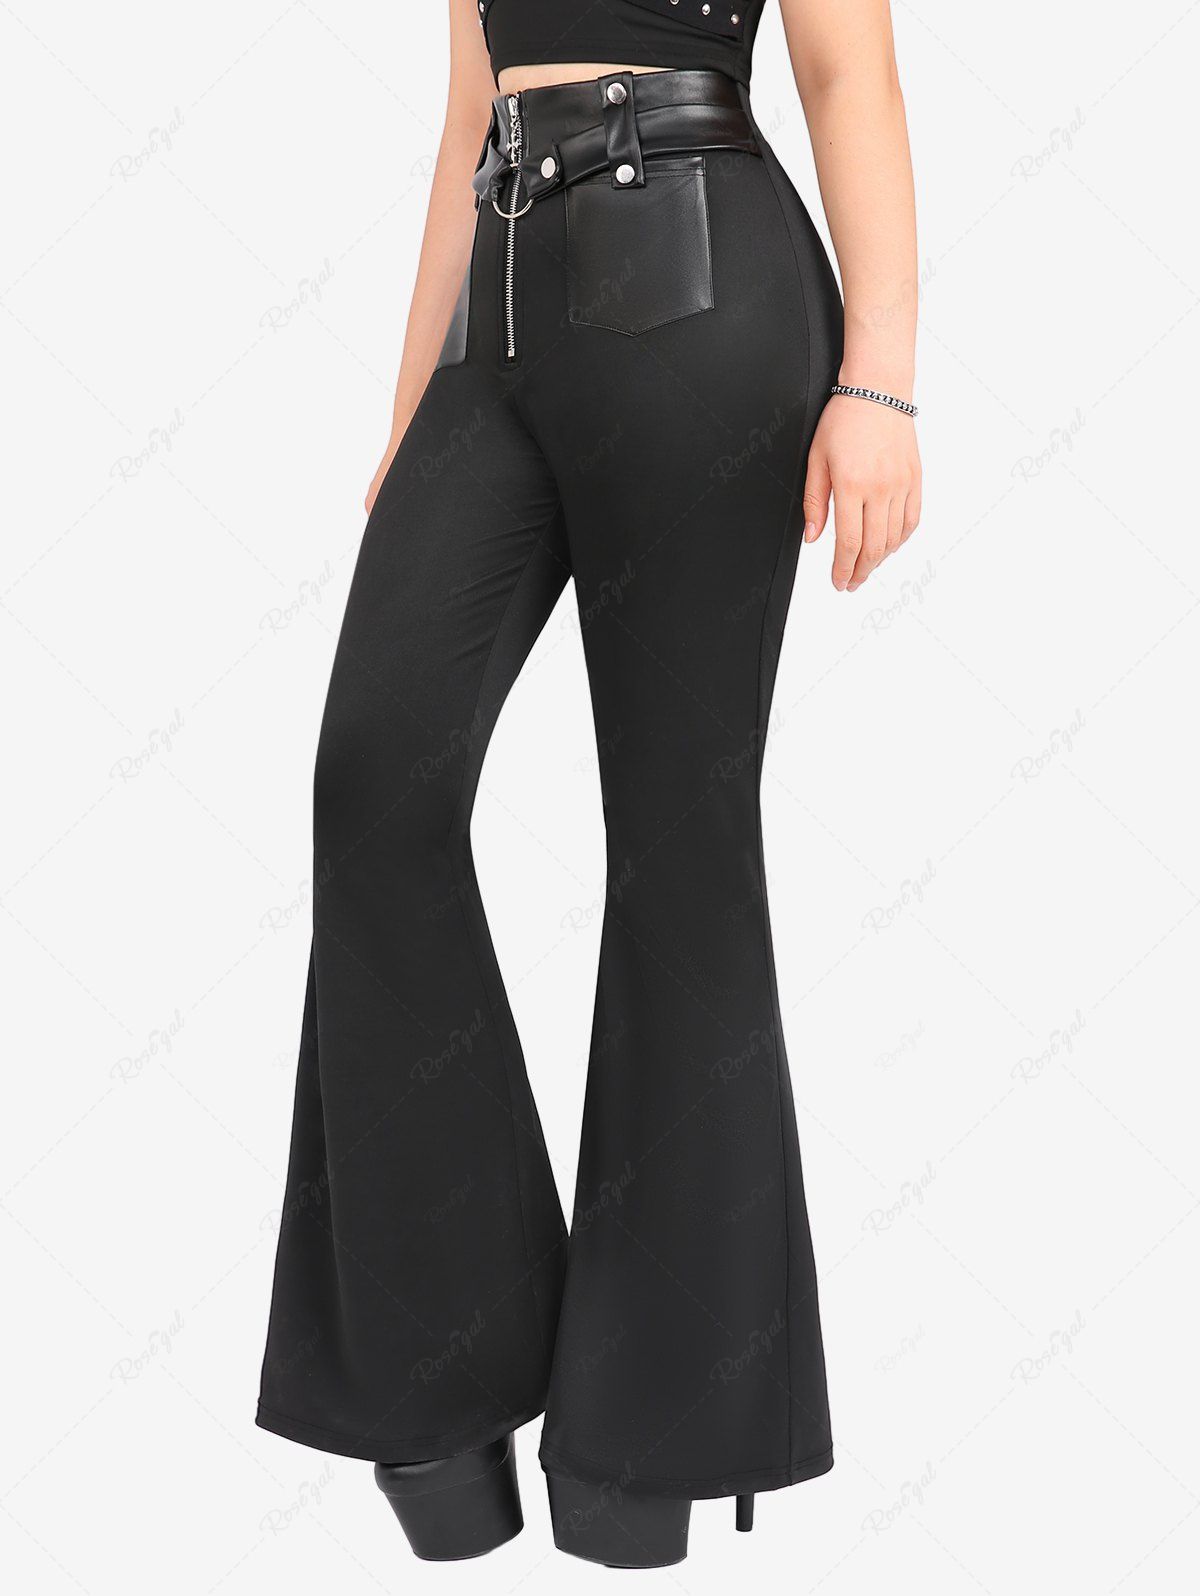 Gothic PU Panel O-Ring Buckle Zipper Pockets Pull On Flare Pants